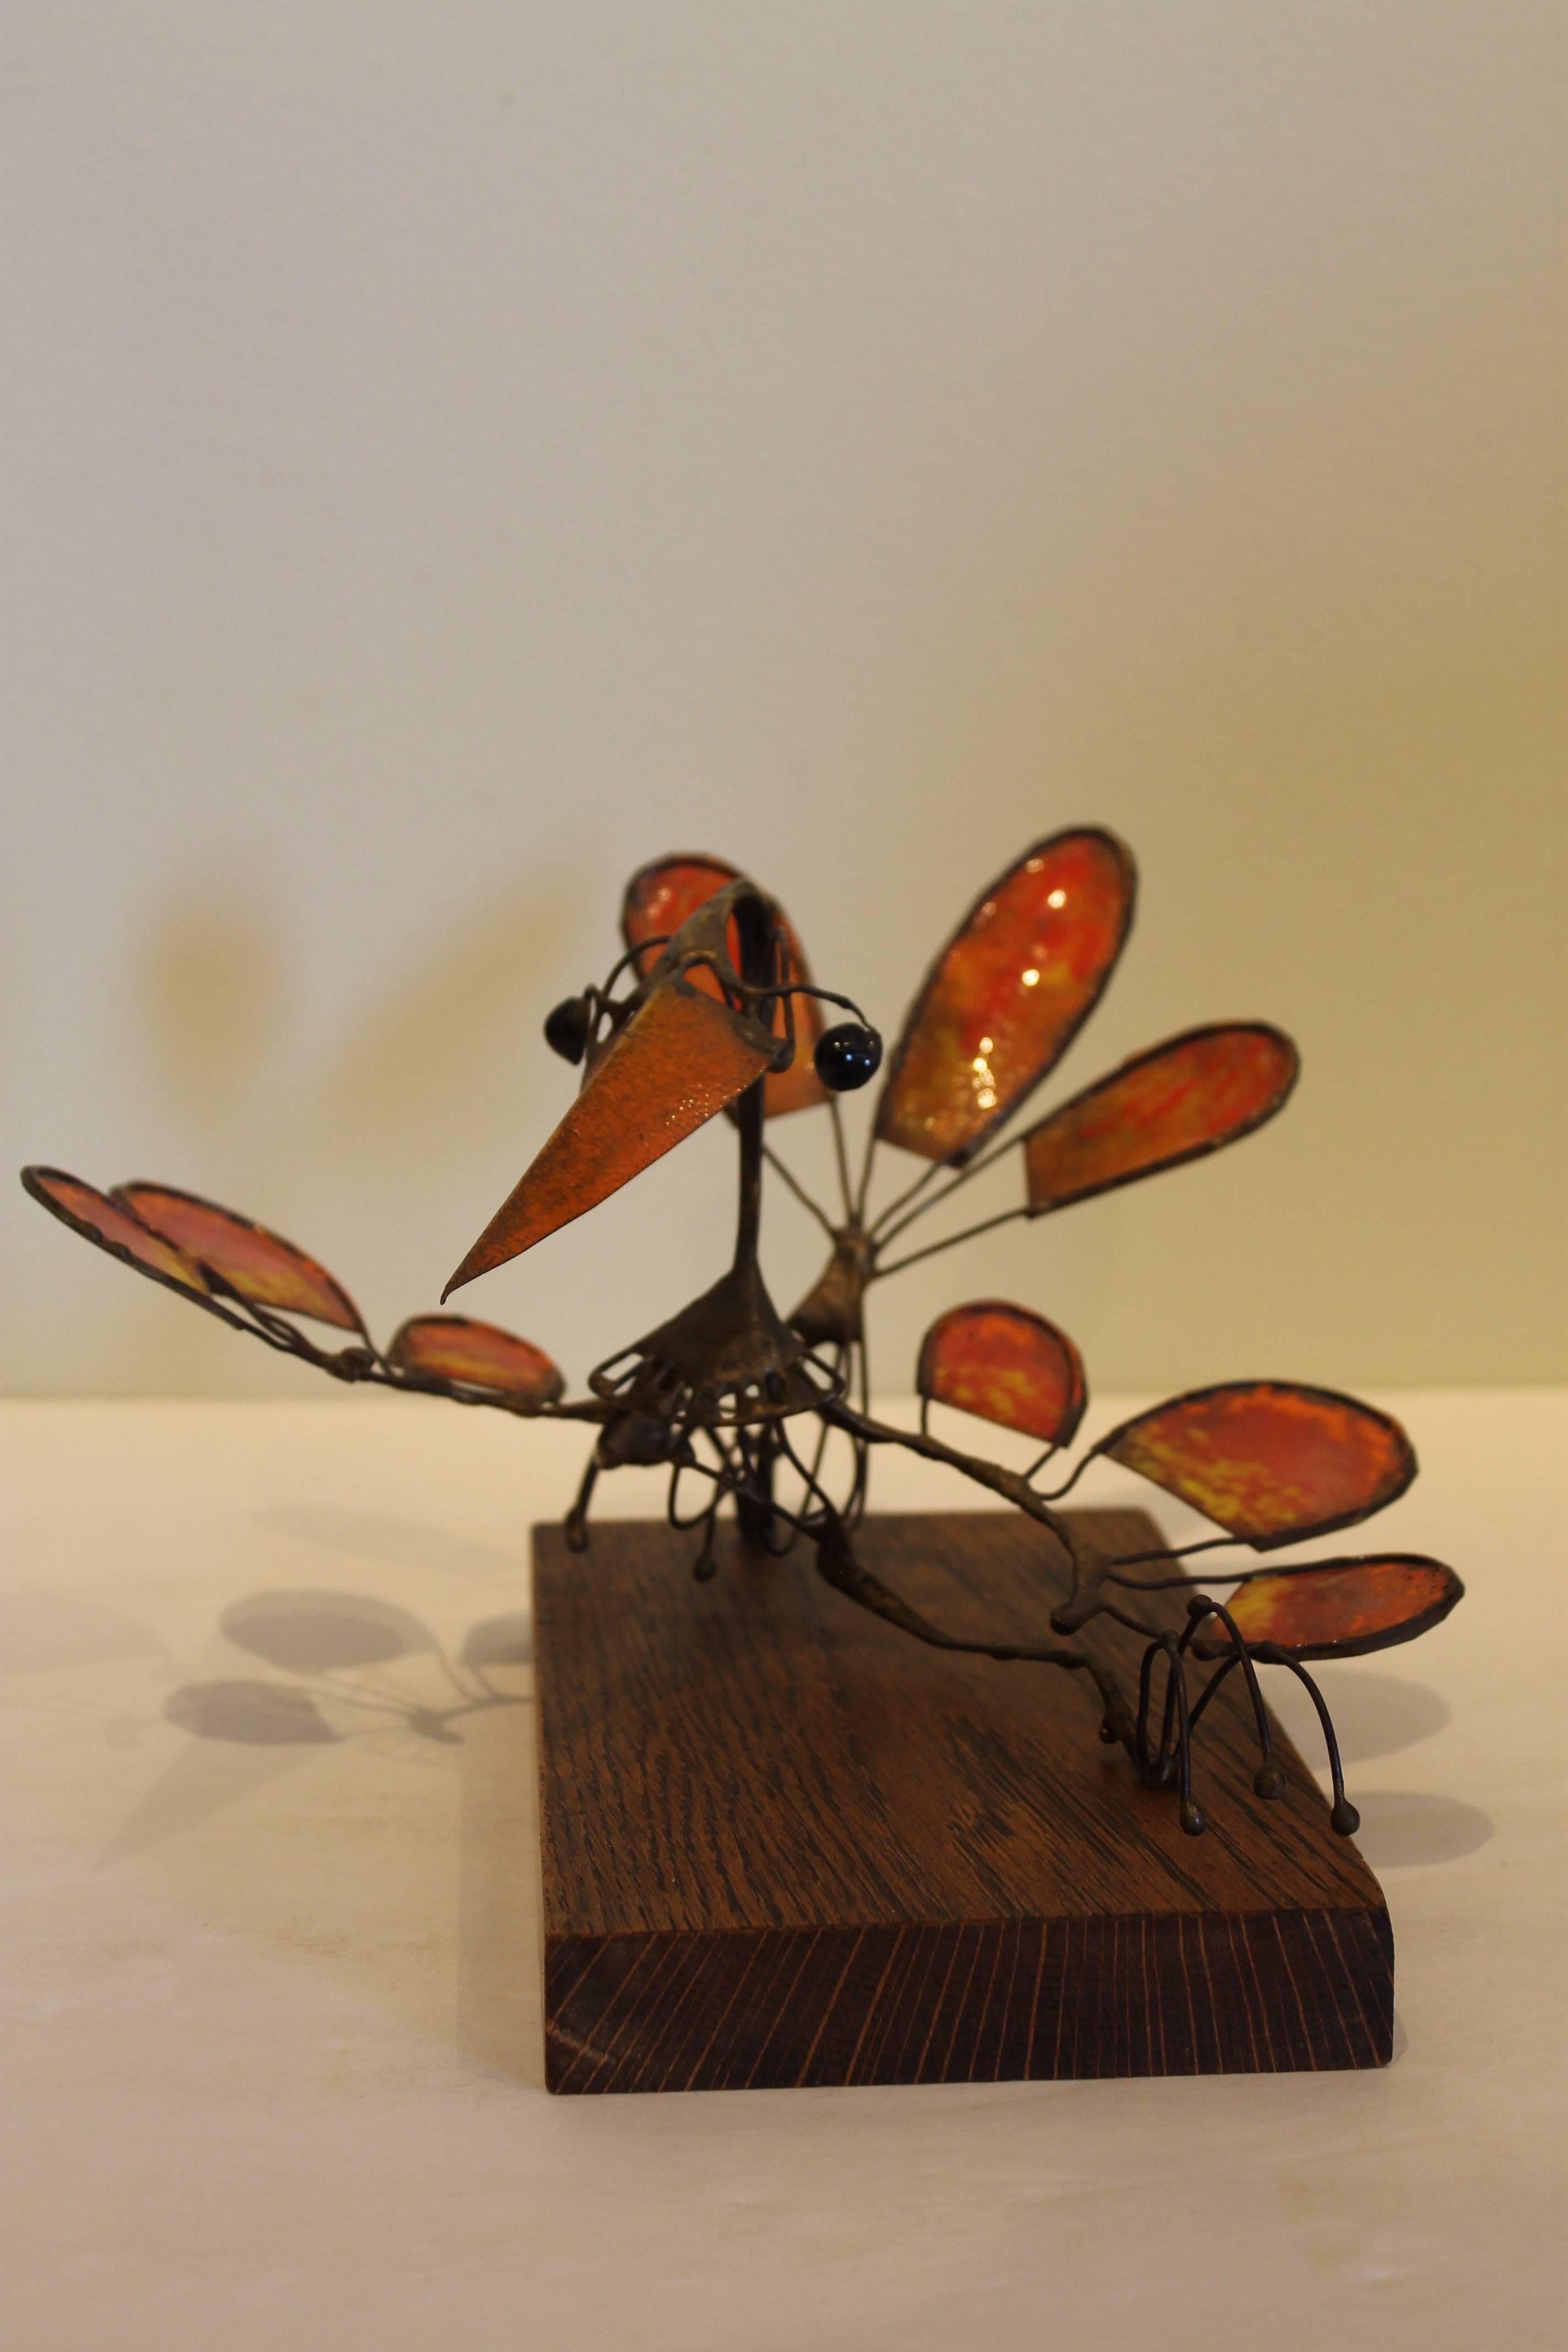 A whimsical wire and enamel sculpture of a bird creature by California sculptor Russ Shears.  Braised wire construction with red-yellow-orange enameled feathers, orange beak and black enameled eyes.  Included with this sculpture is a 1966 issue of